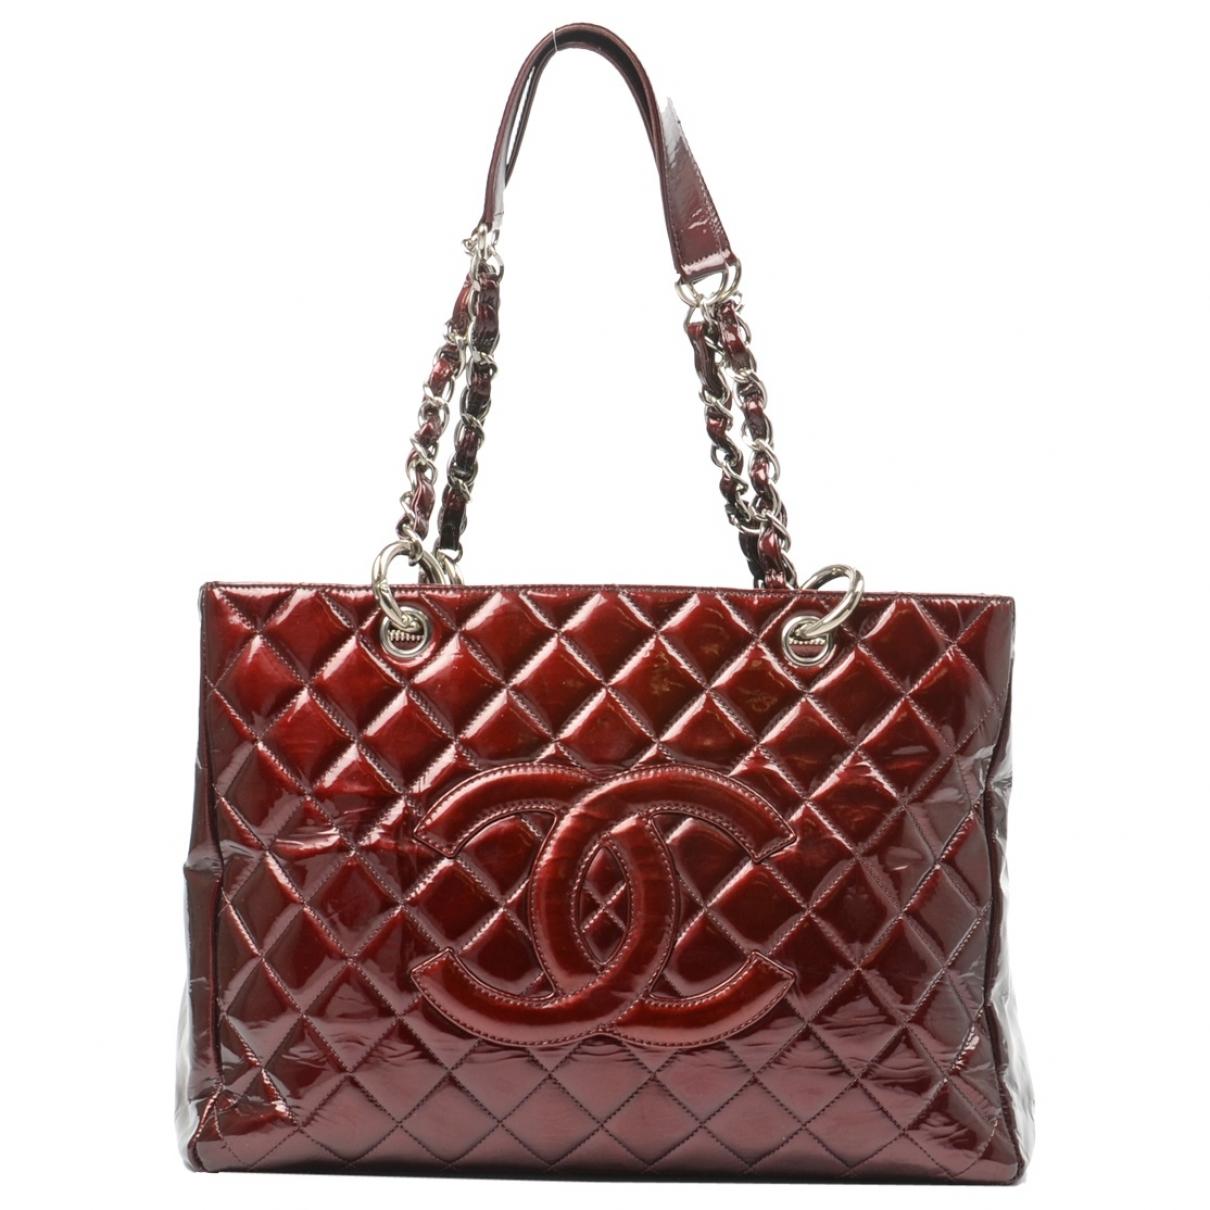 Lyst - Chanel Grand Shopping Burgundy Patent Leather Handbag in Red